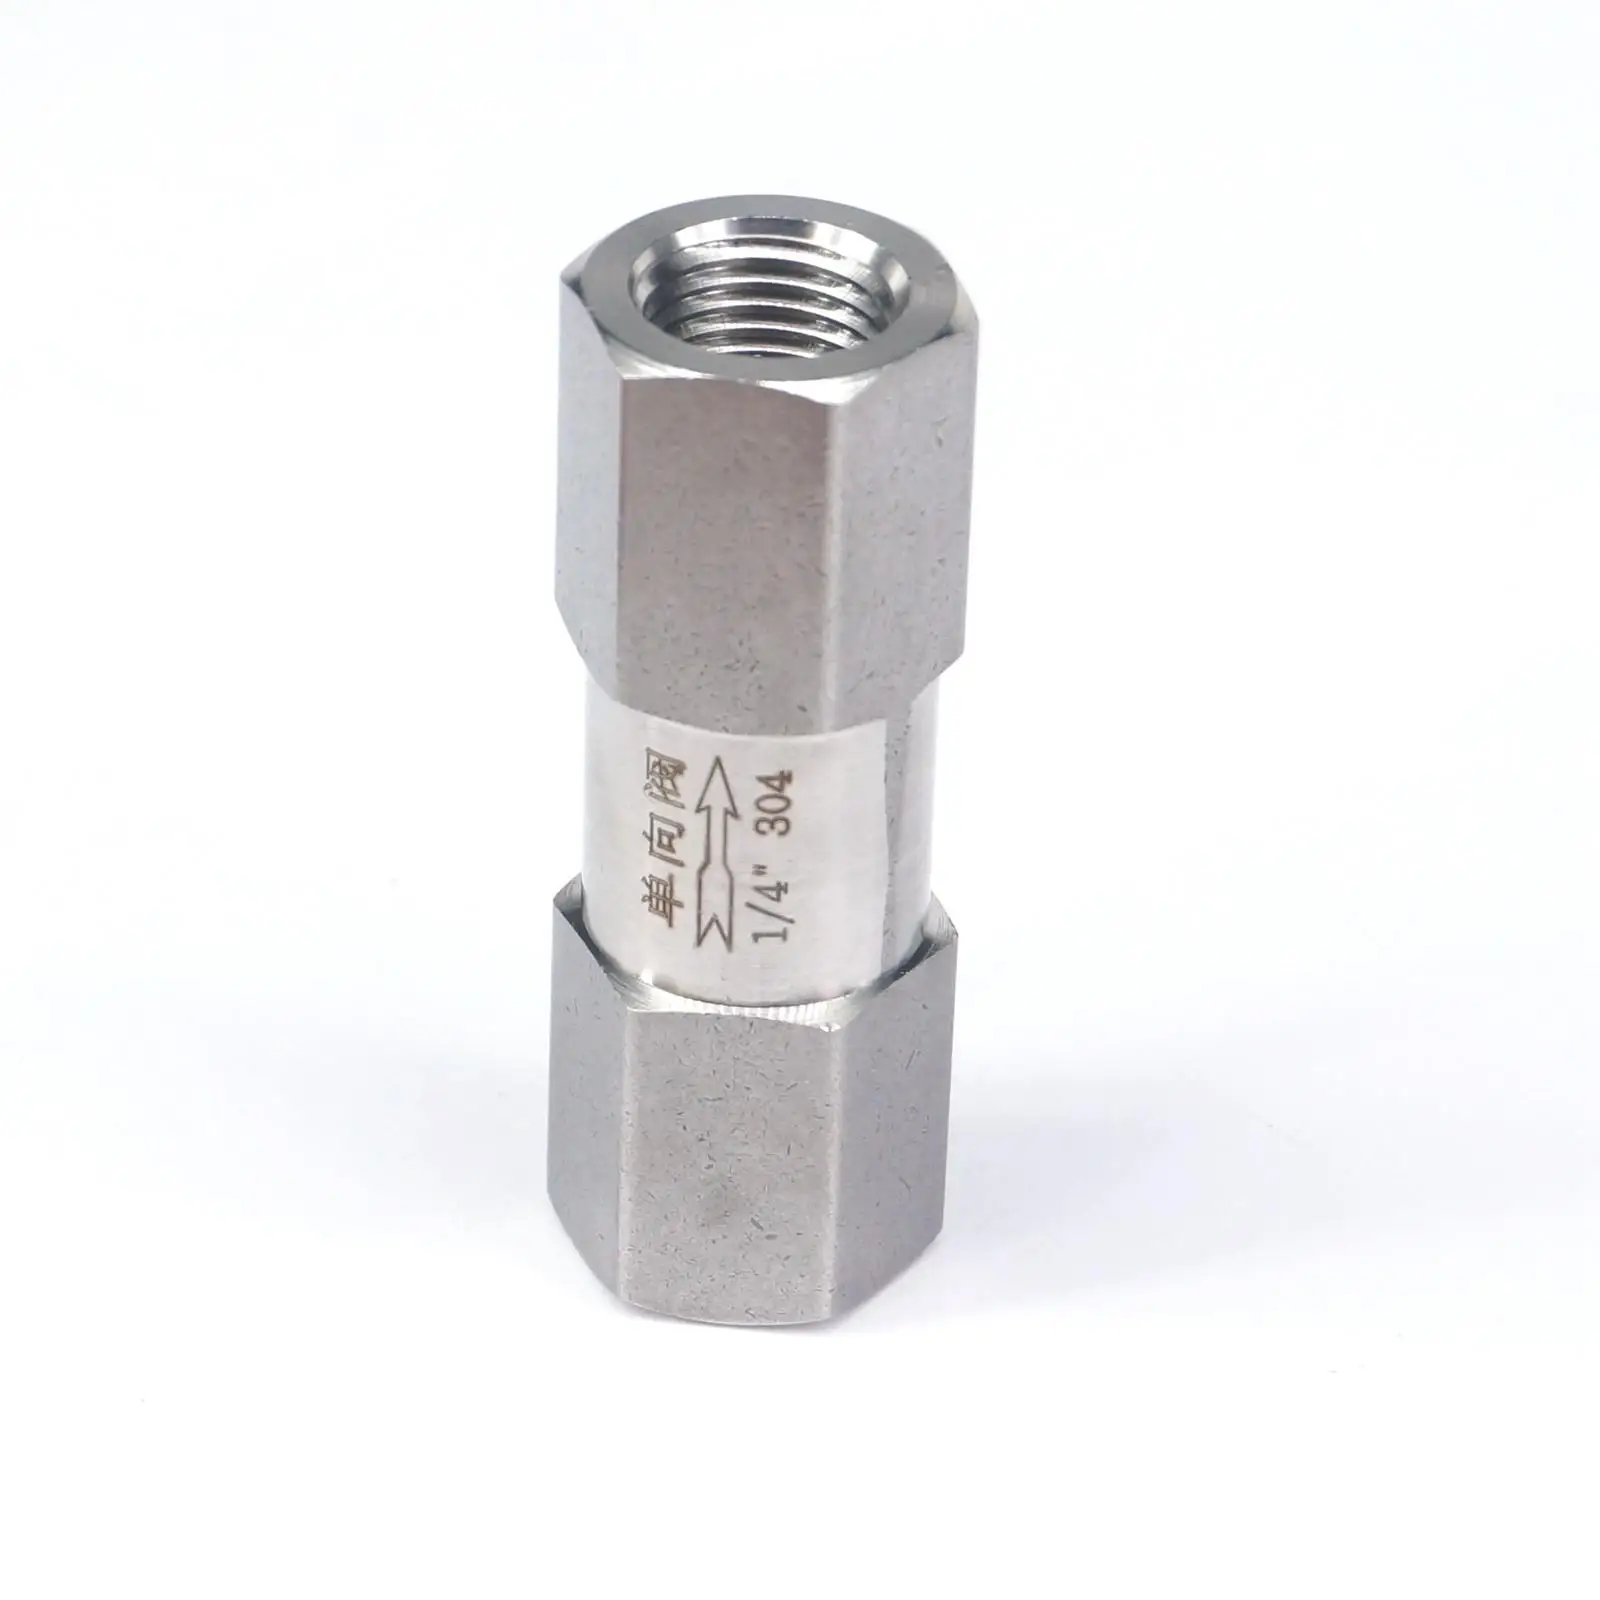 Stainless Steel Hex BSPP Female Thread One Way Air Check Valve for Water Pipe Connection Female Thread,Stainless steel Check Valve 1/4”